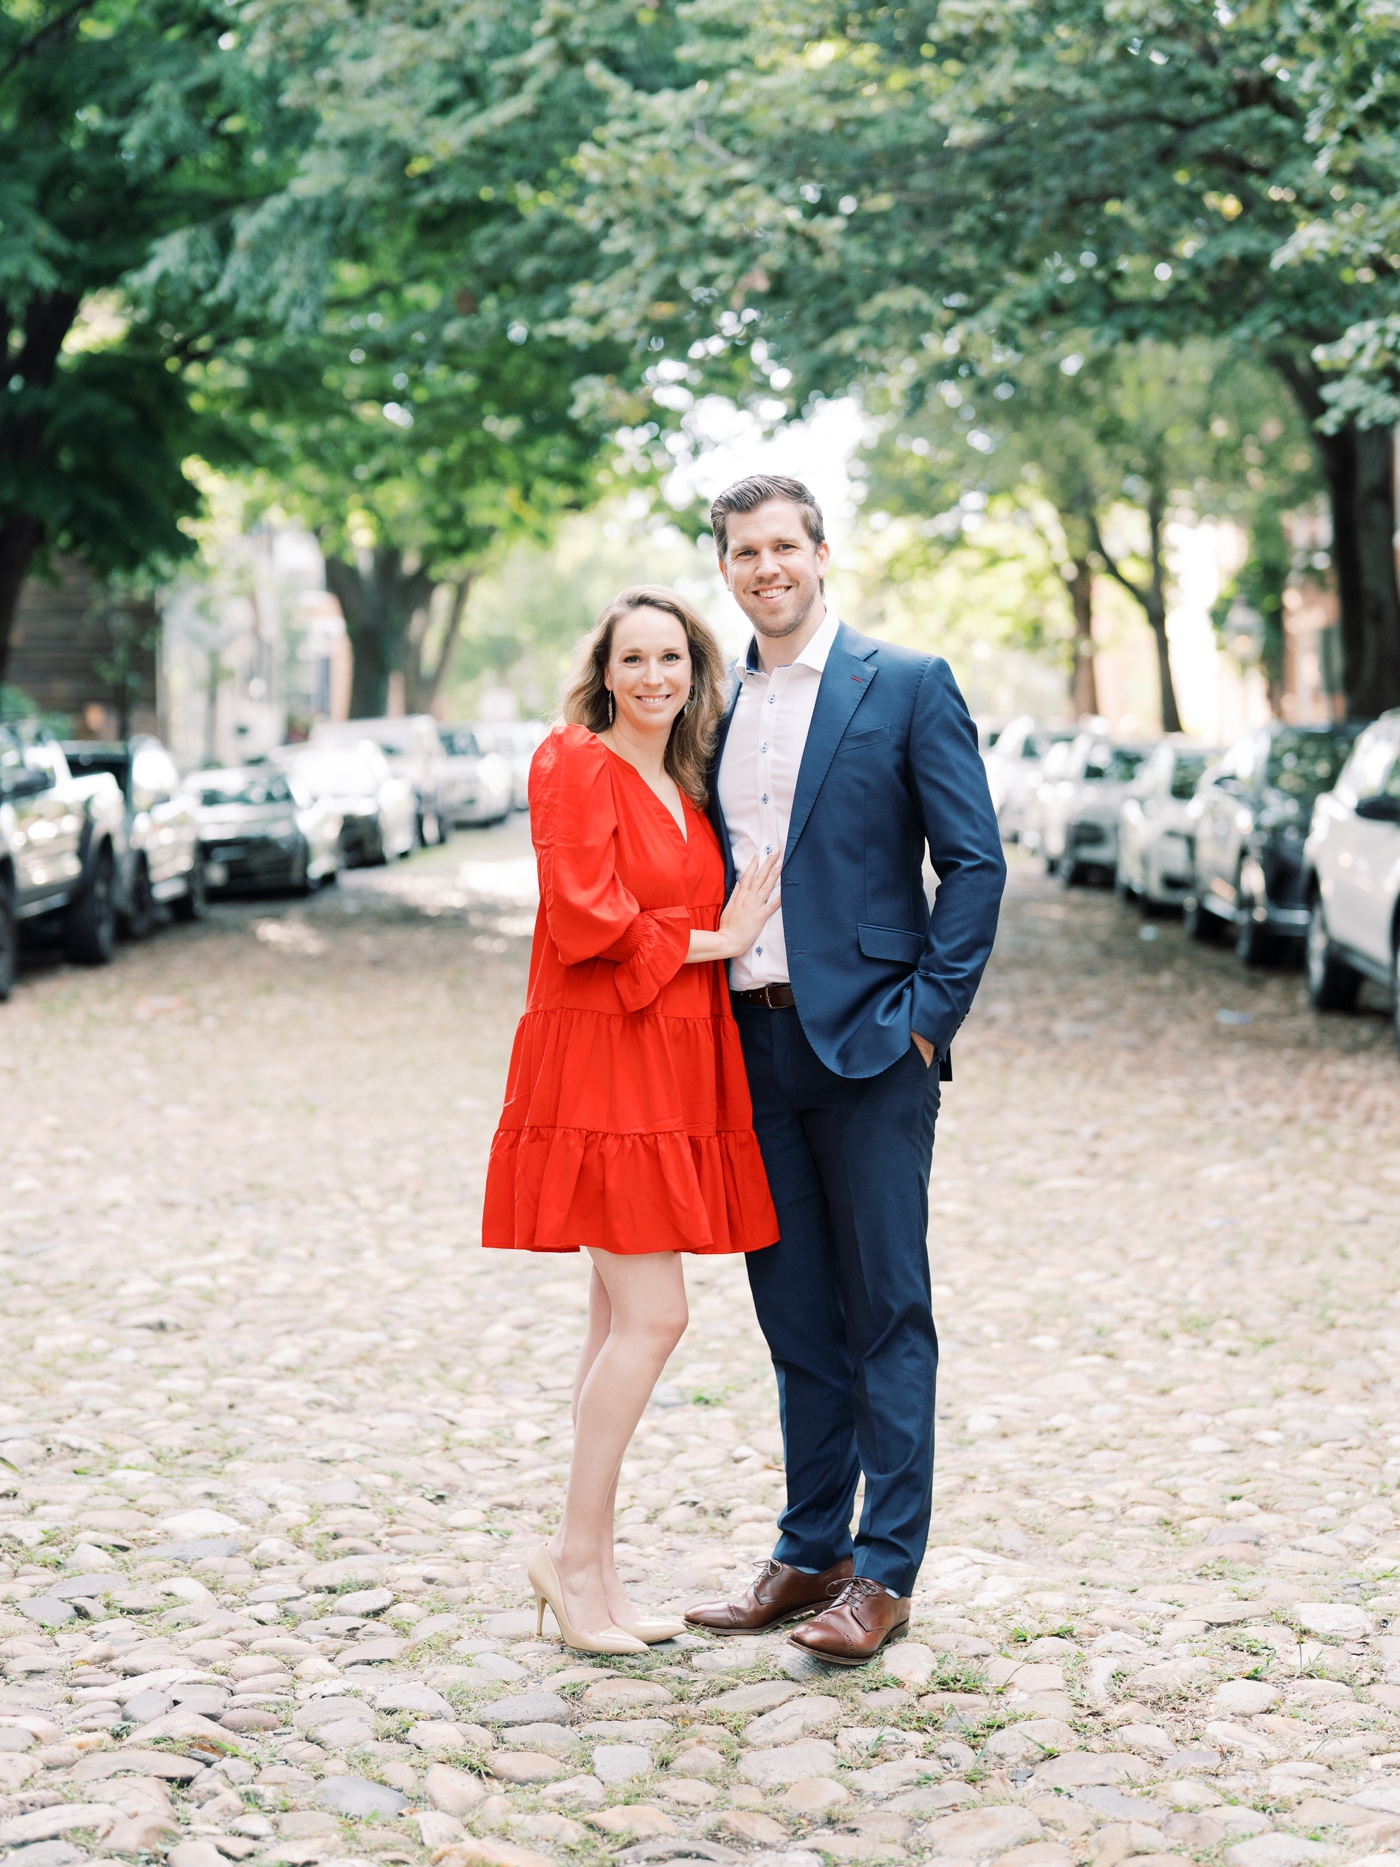 Couple in suit and dress on cobblestone street